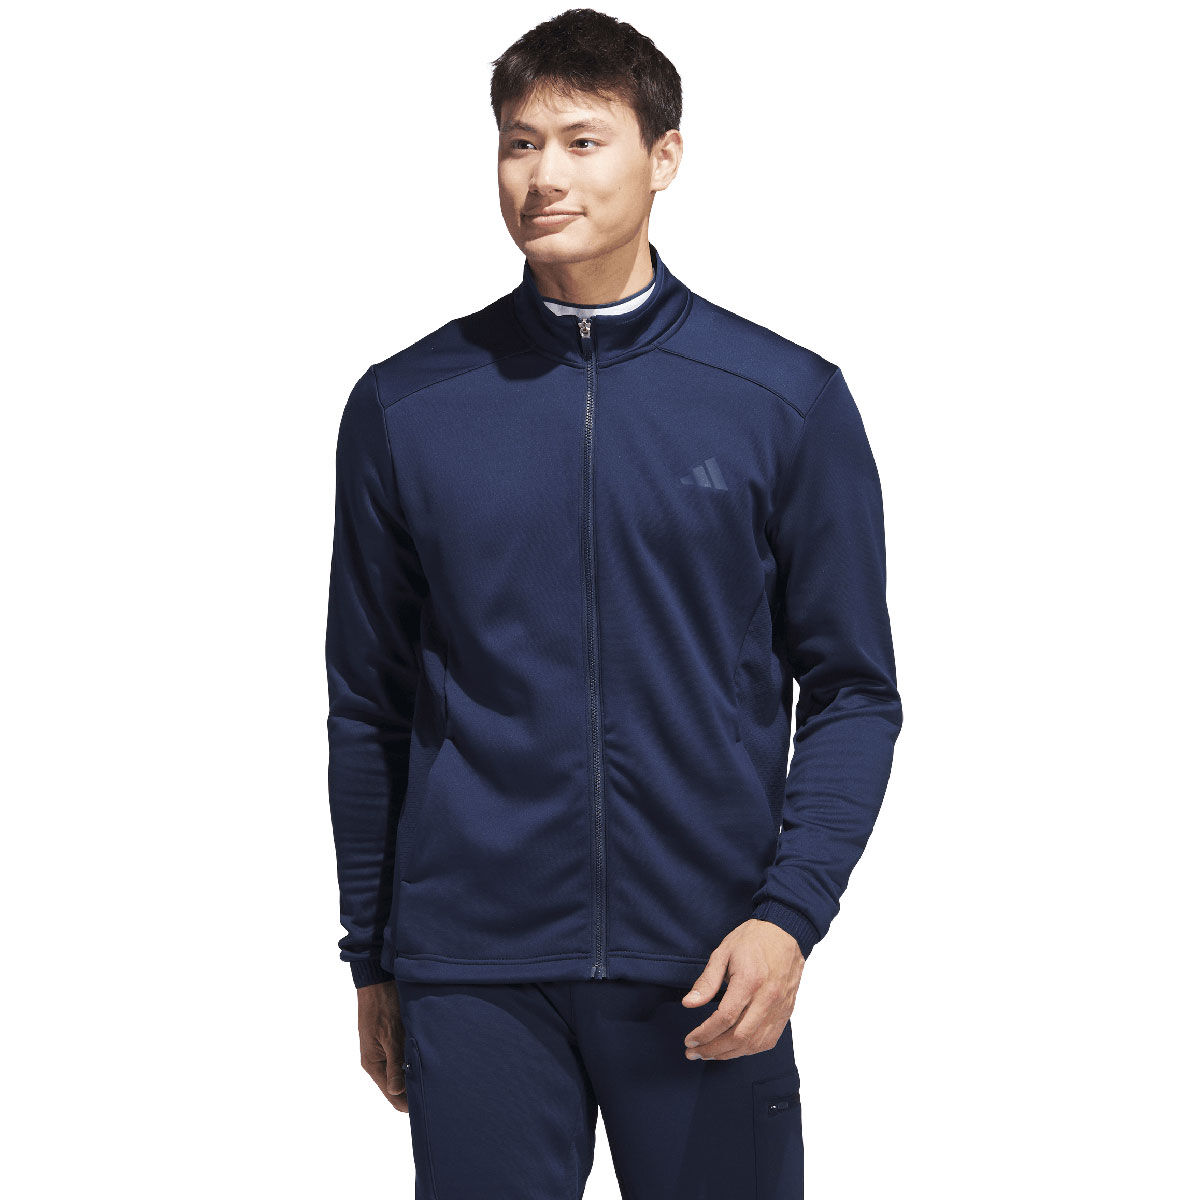 adidas Men’s COLD.RDY Full Zip Golf Jacket, Mens, Collegiate navy, Small | American Golf